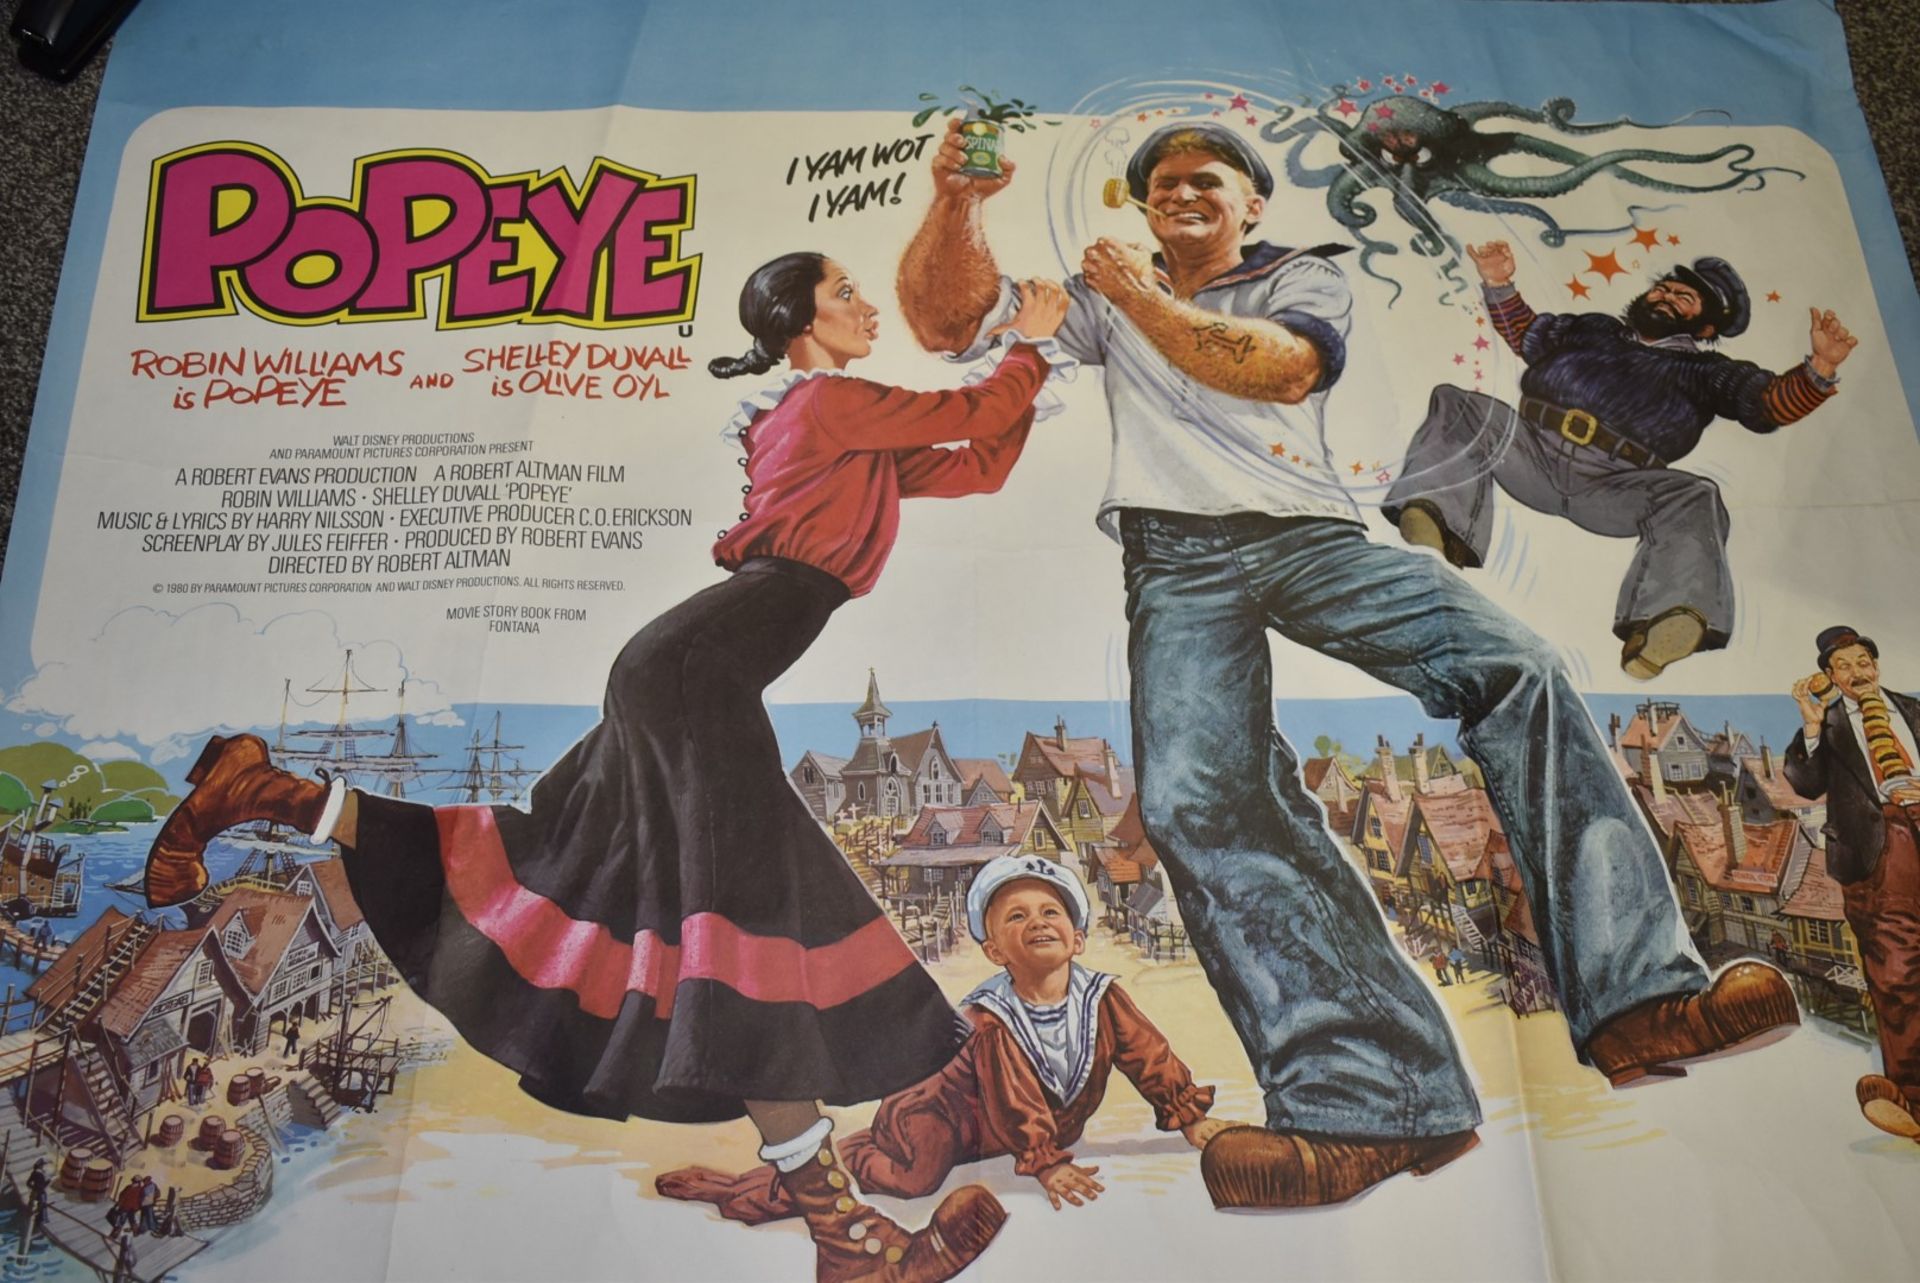 1 x Quad Movie Poster - POPEYE - Starring Robin Williams and Shelley Duvall - 1980 Film - Walt - Image 7 of 8